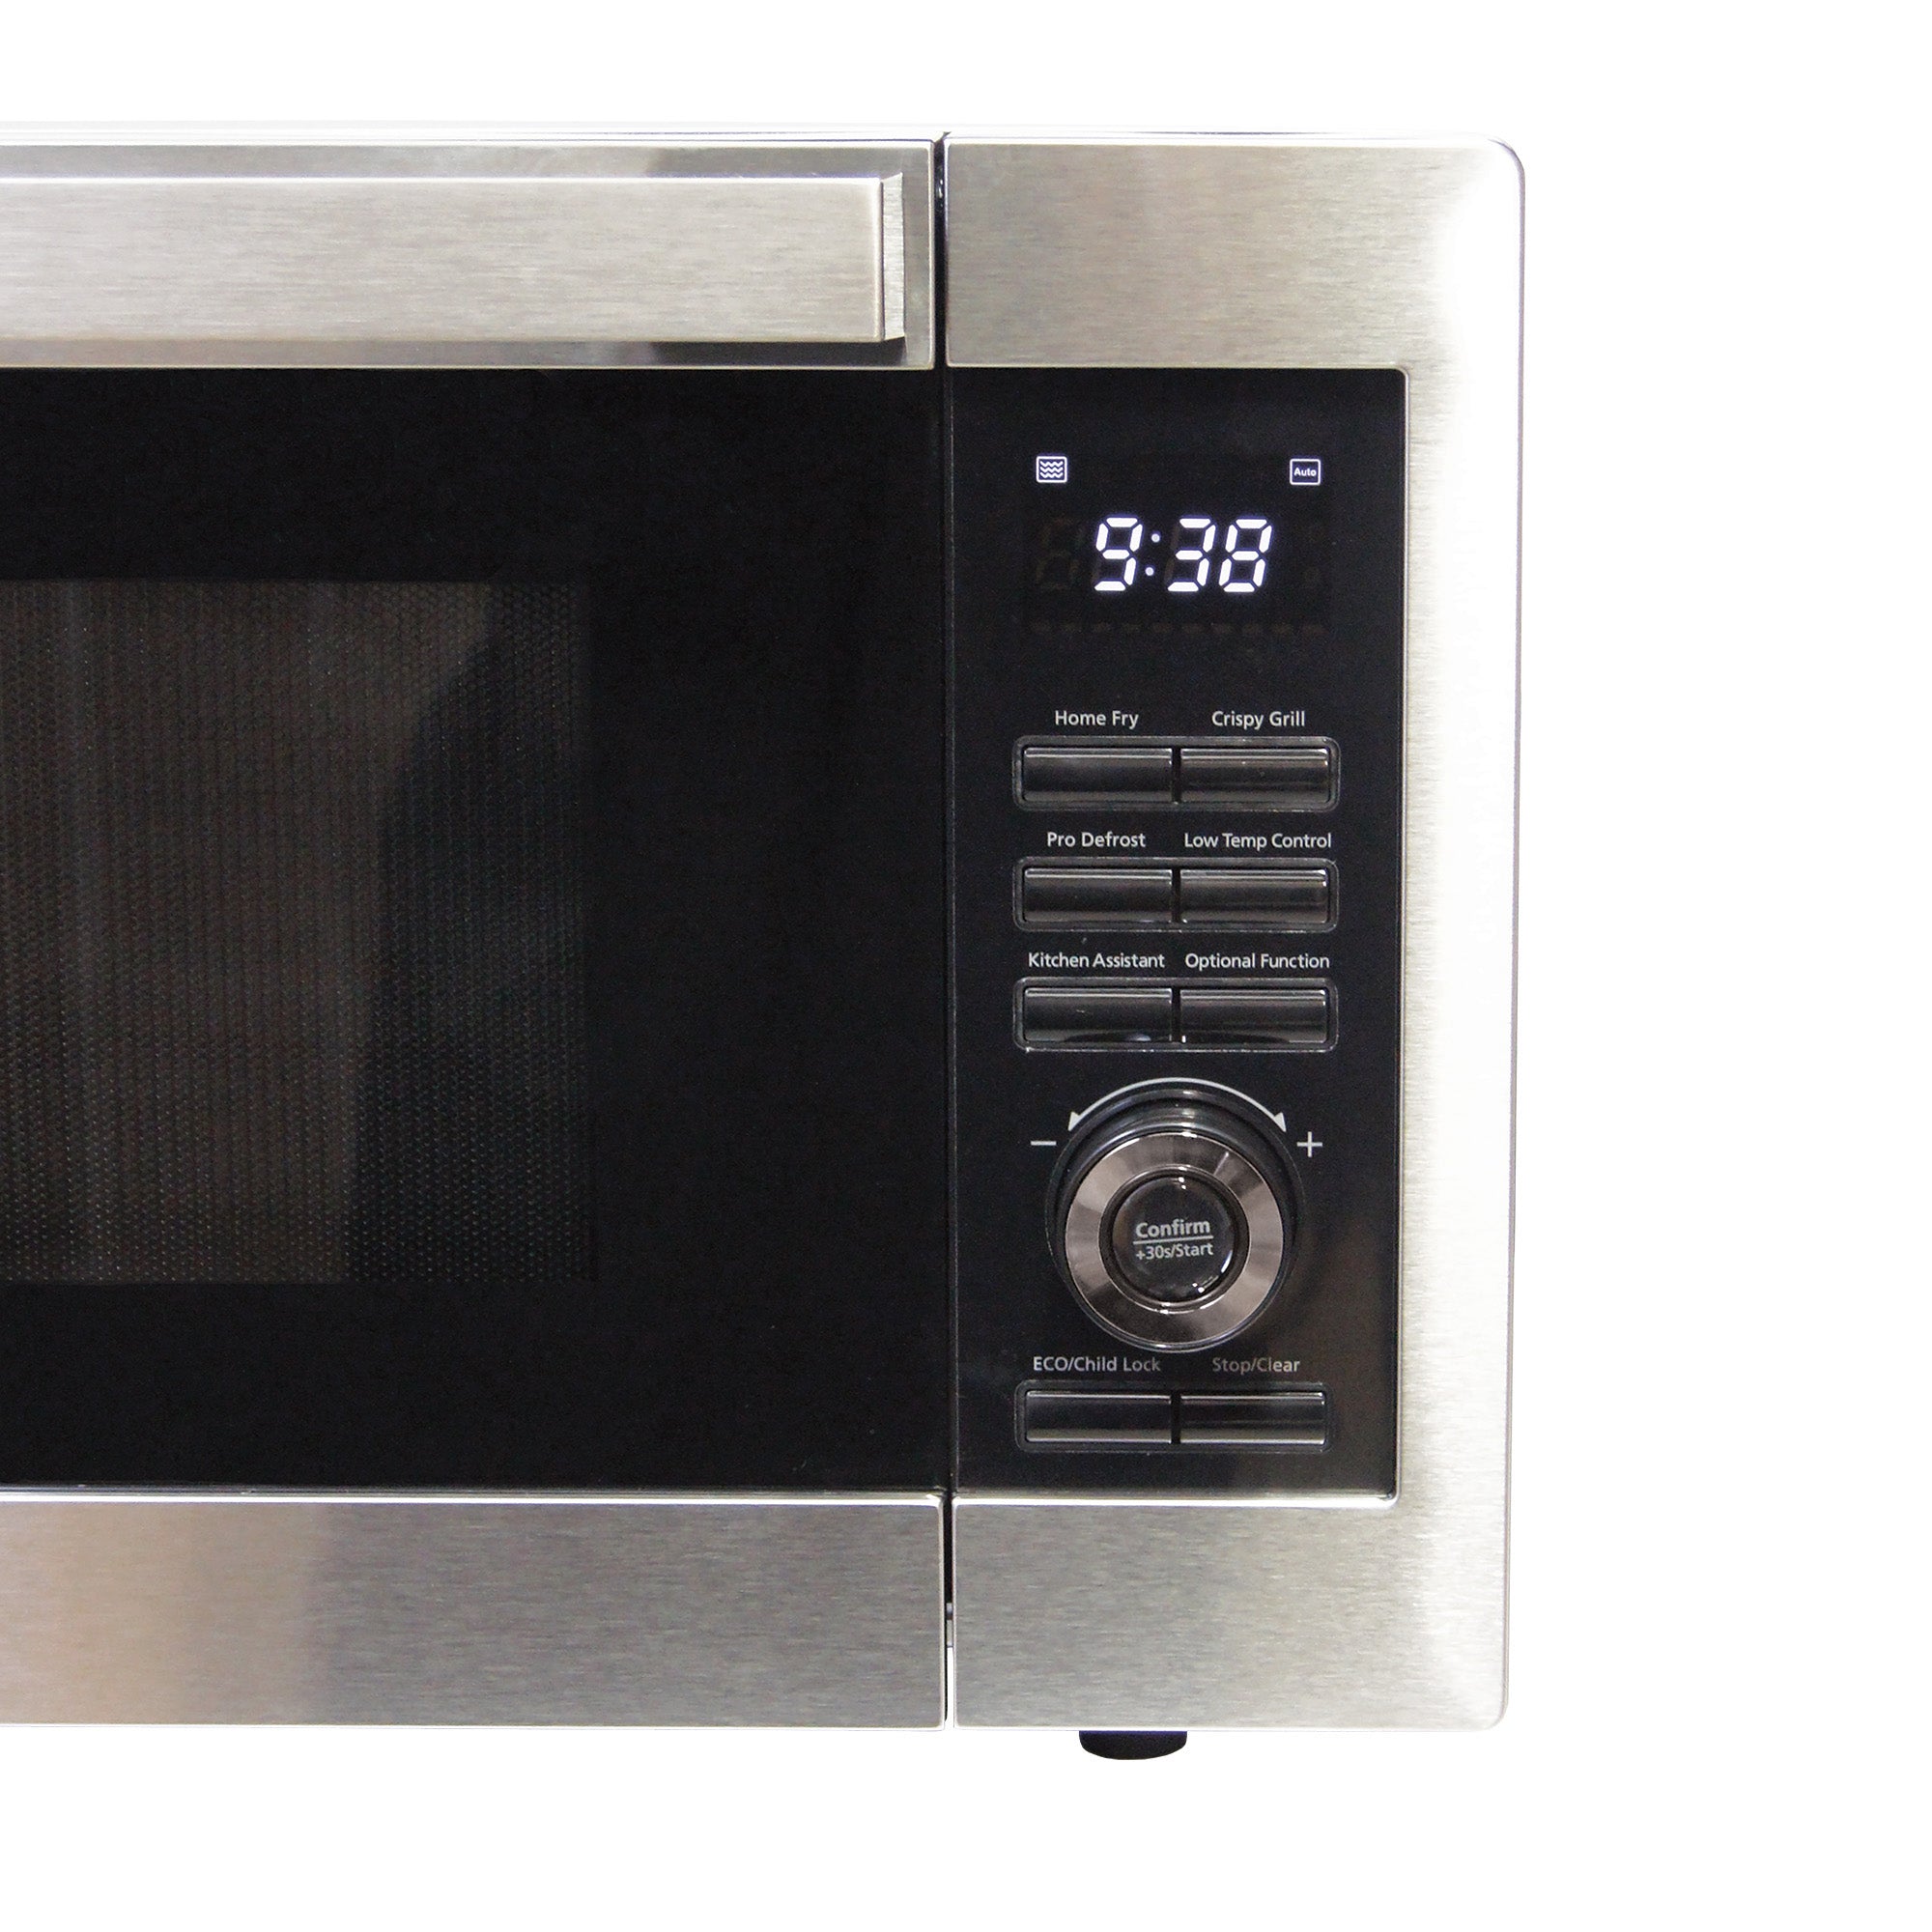 Digital Combination Microwave with Grill, 30 Litre Capacity, 1000W